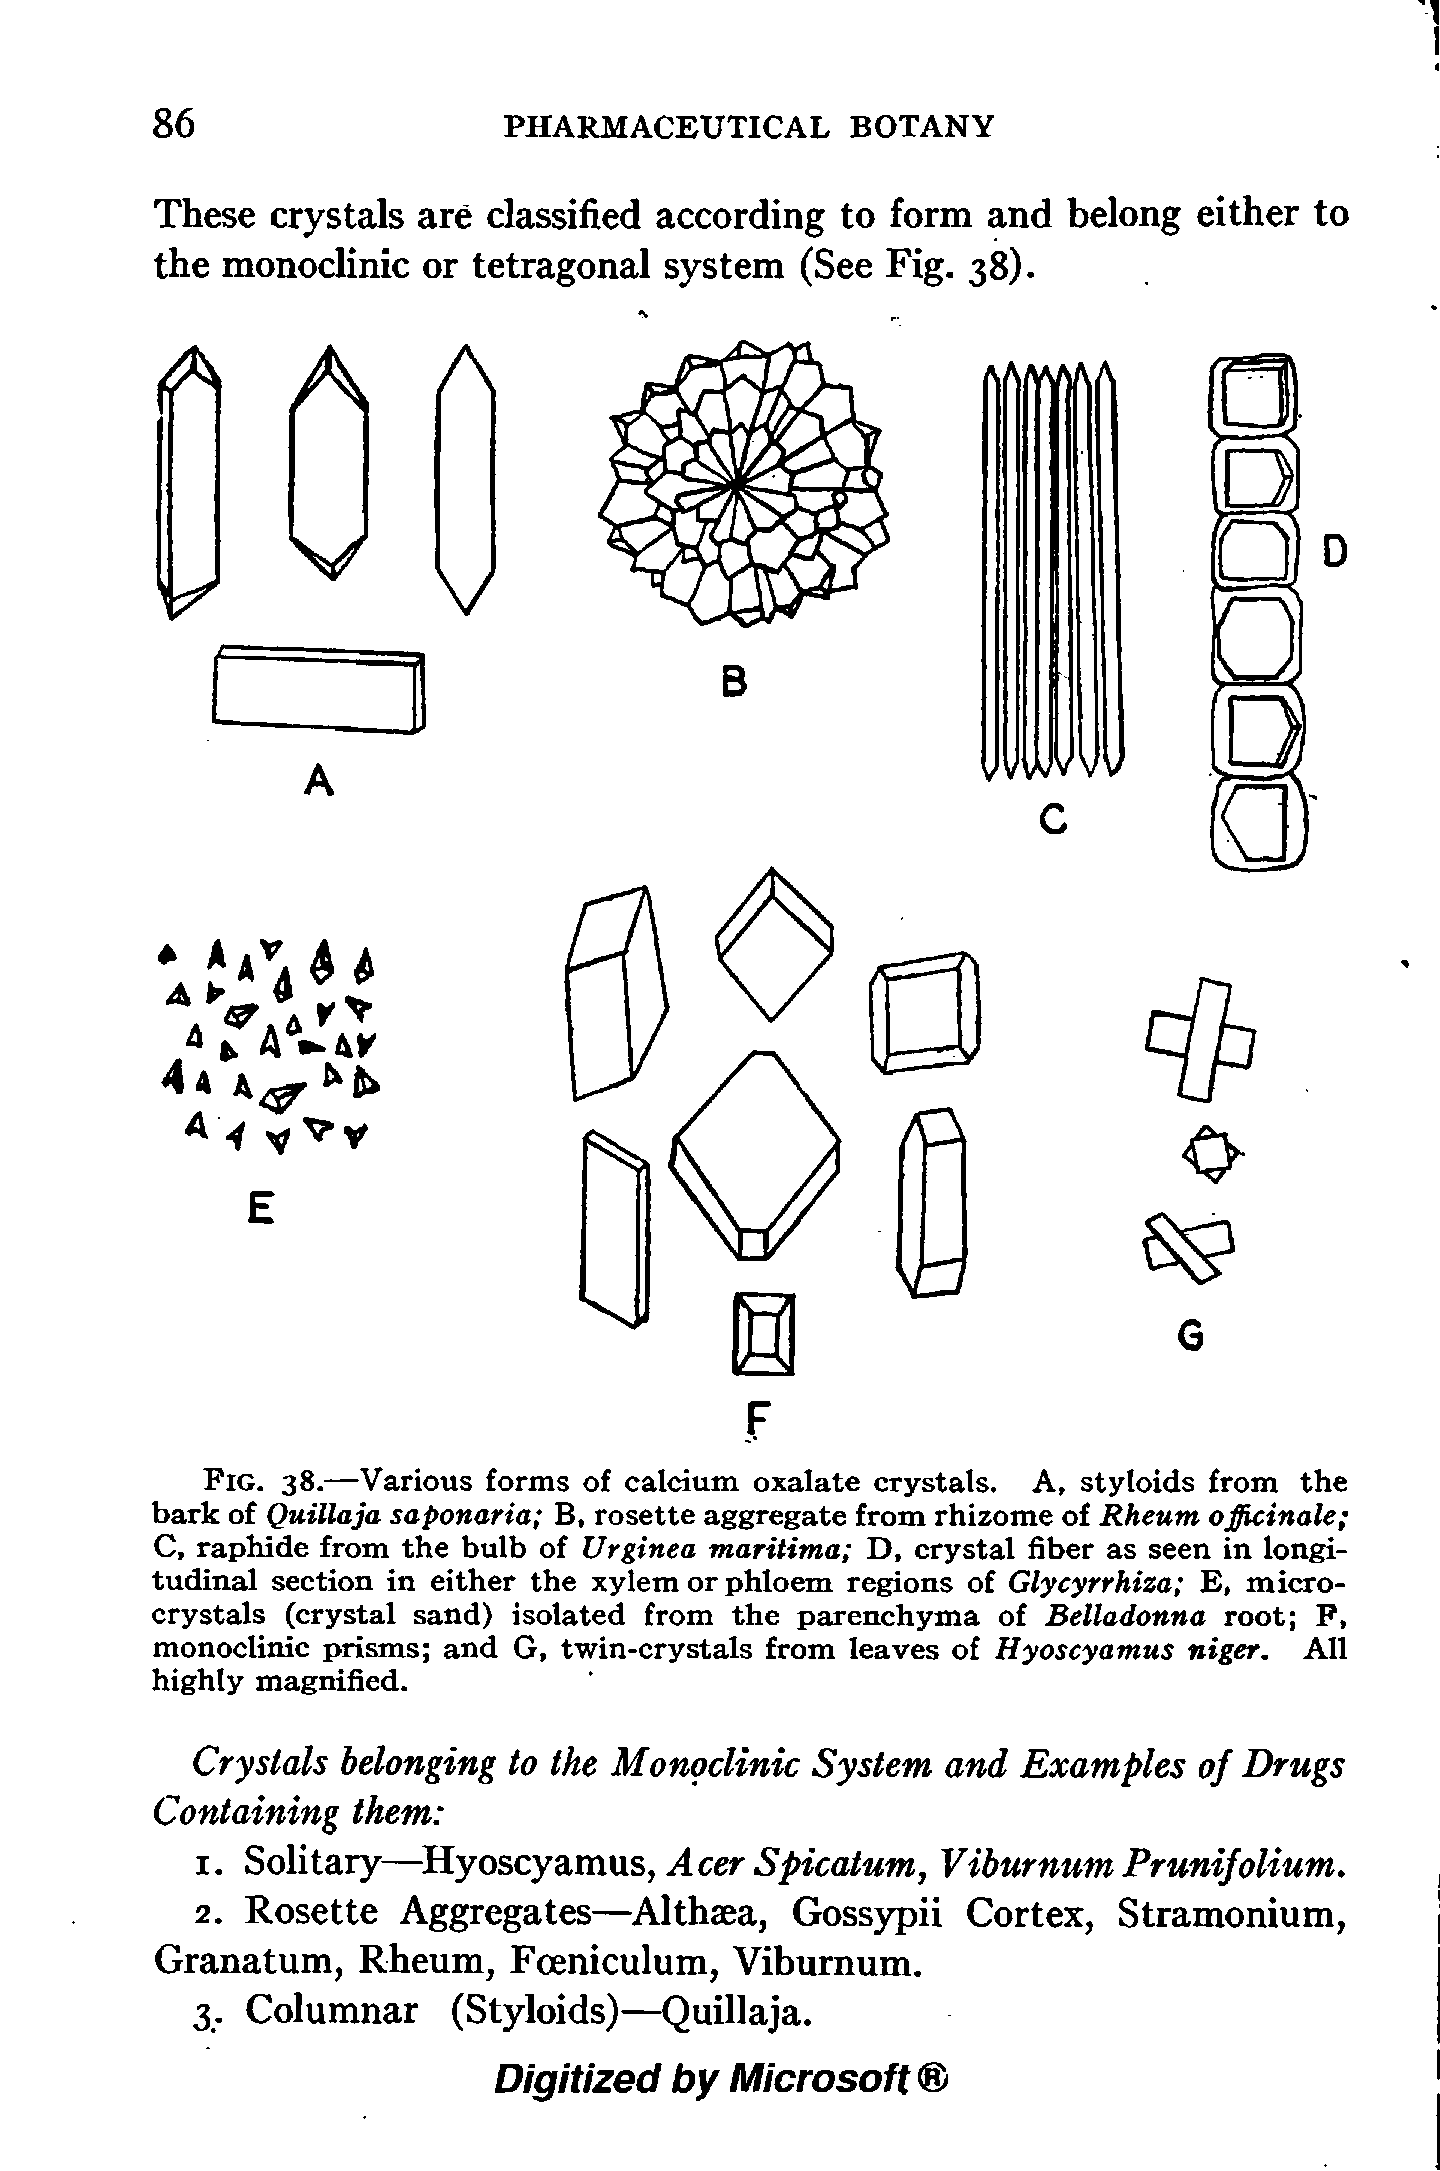 Fig. 38.—Various forms of calcium oxalate crystals. A, styloids from the bark of QuiUaja saponaria B, rosette aggregate from rhizome of Rheum officinale C, raphide from the bulb of Urginea maritima D. crystal fiber as seen in longitudinal section in either the xylem or phloem regions of Glycyrrhiza E, microcrystals (crystal sand) isolated from the parenchyma of Belladonna root F, monoclinic prisms and G, twin-crystals from leaves of Hyoscyamus niger. All highly magnified.